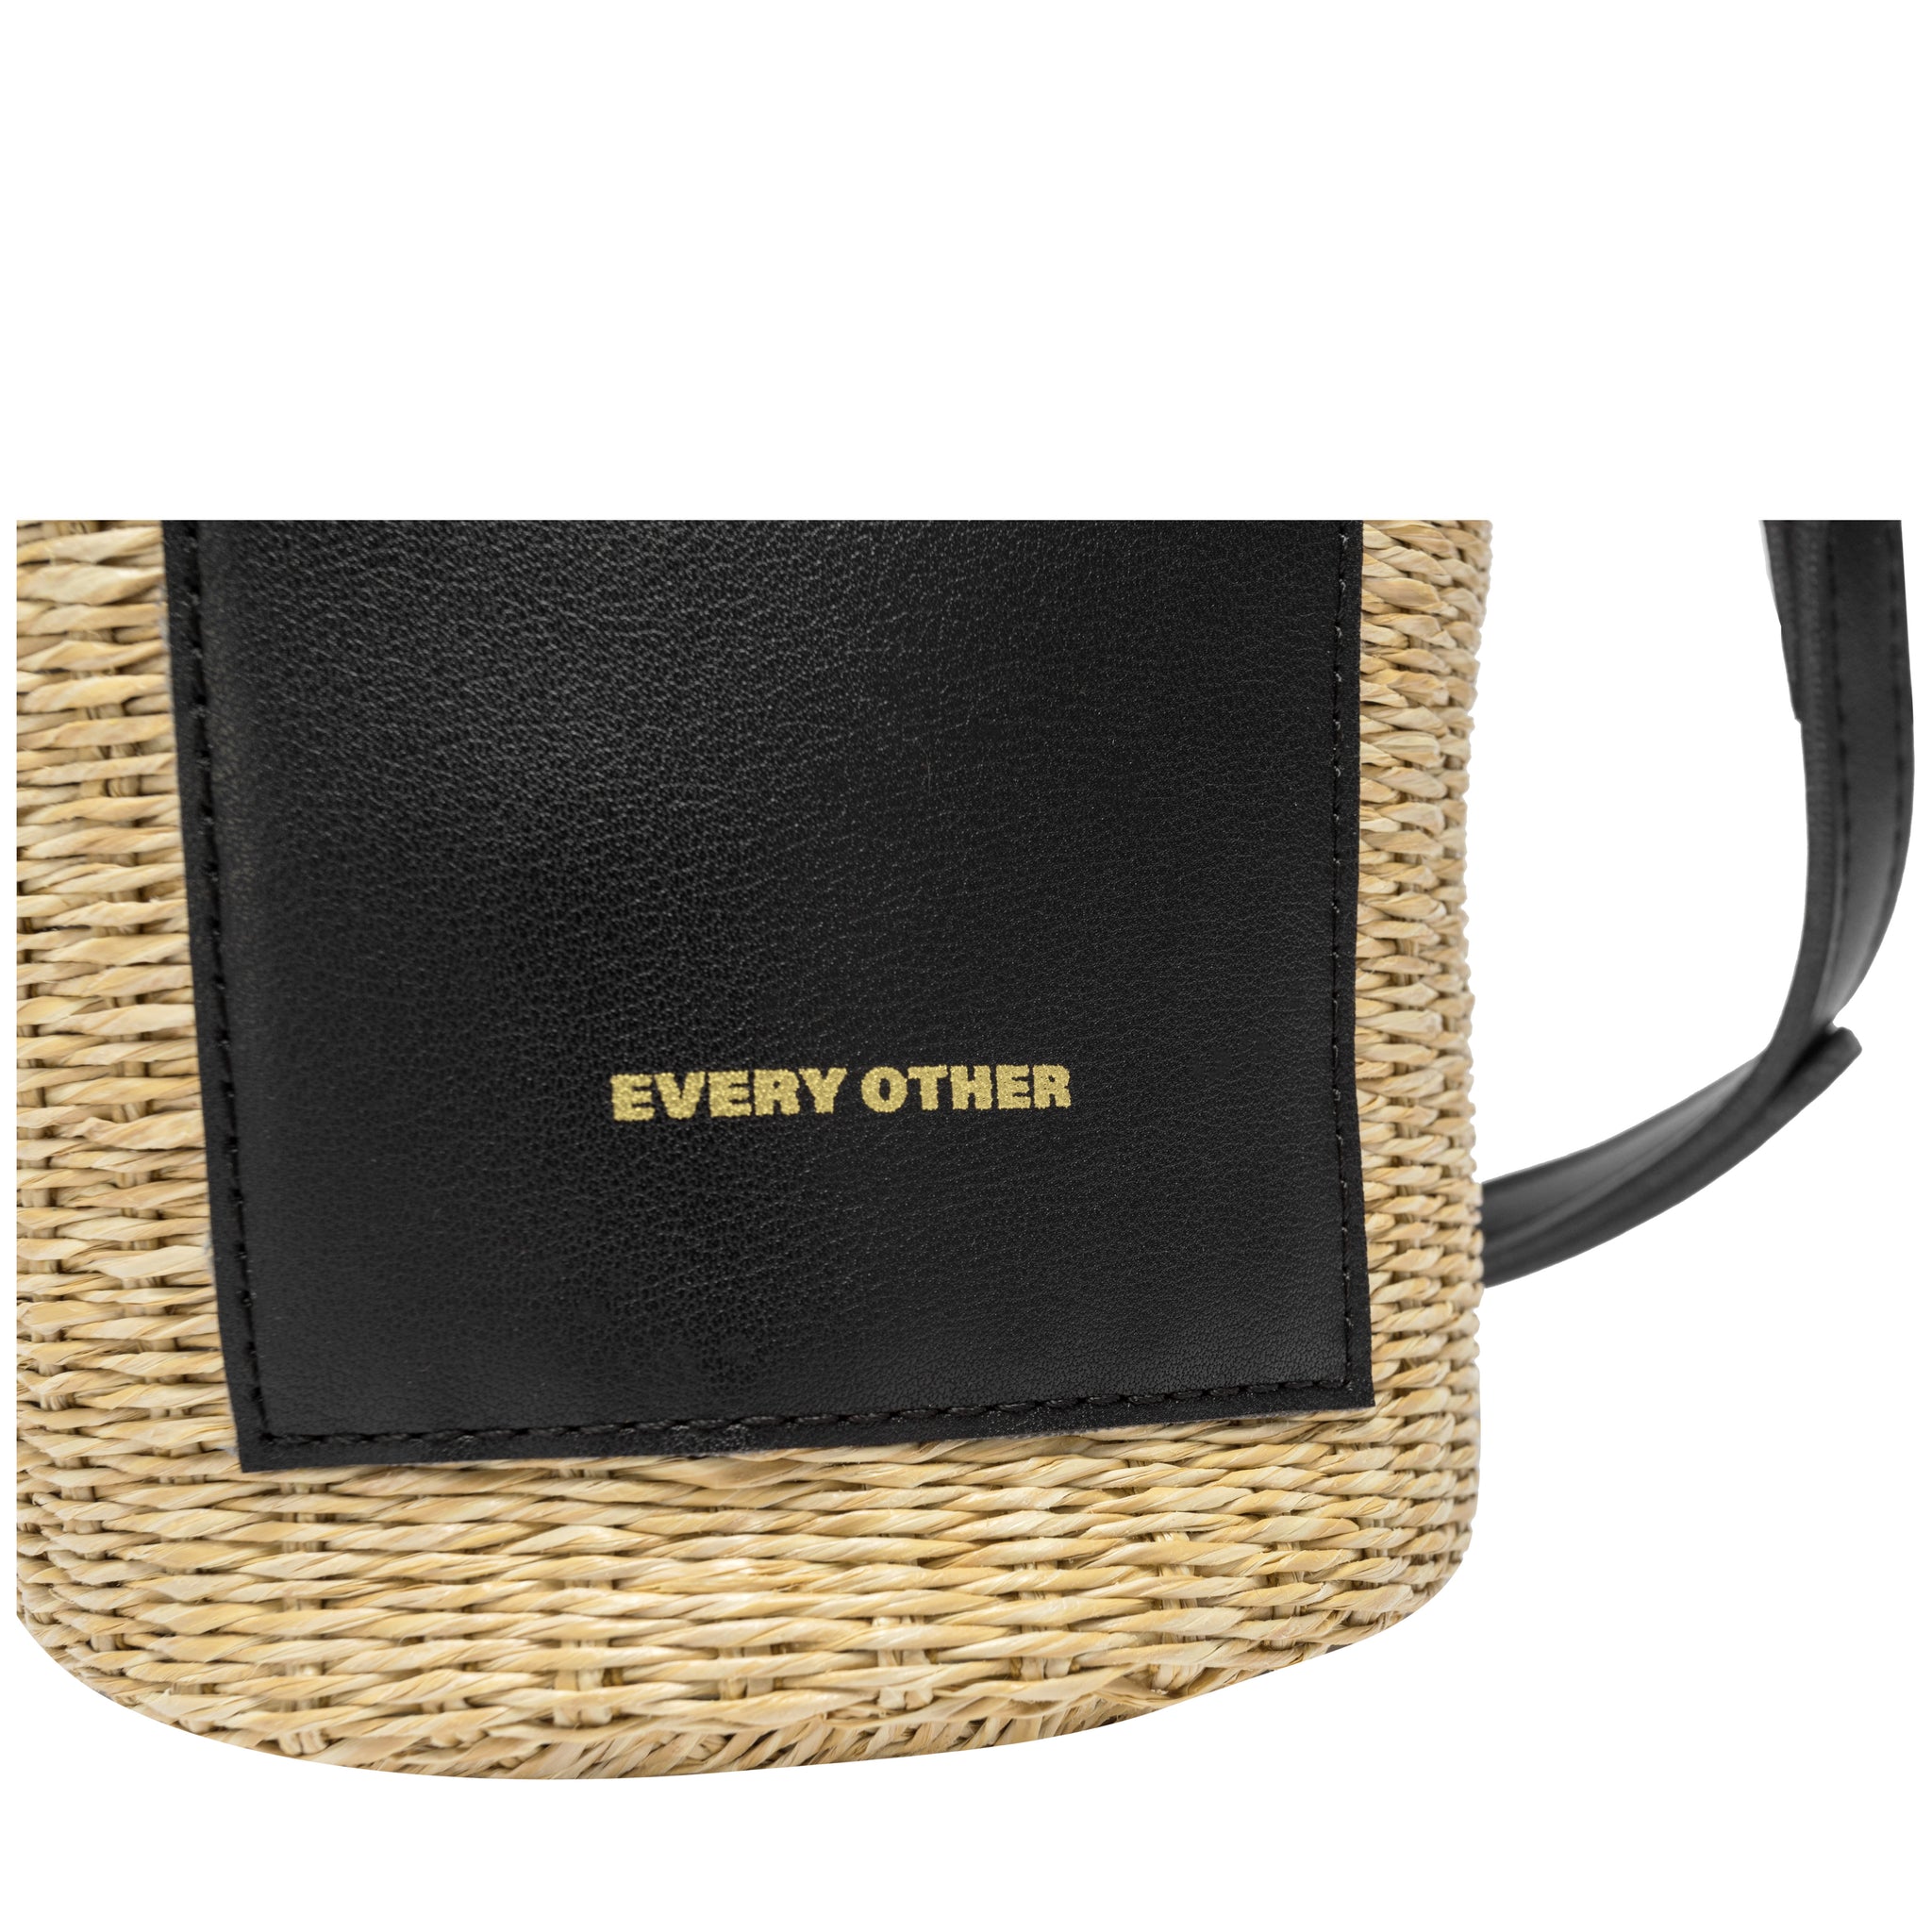 Every Other - Cylindrical drawstring bag - Black